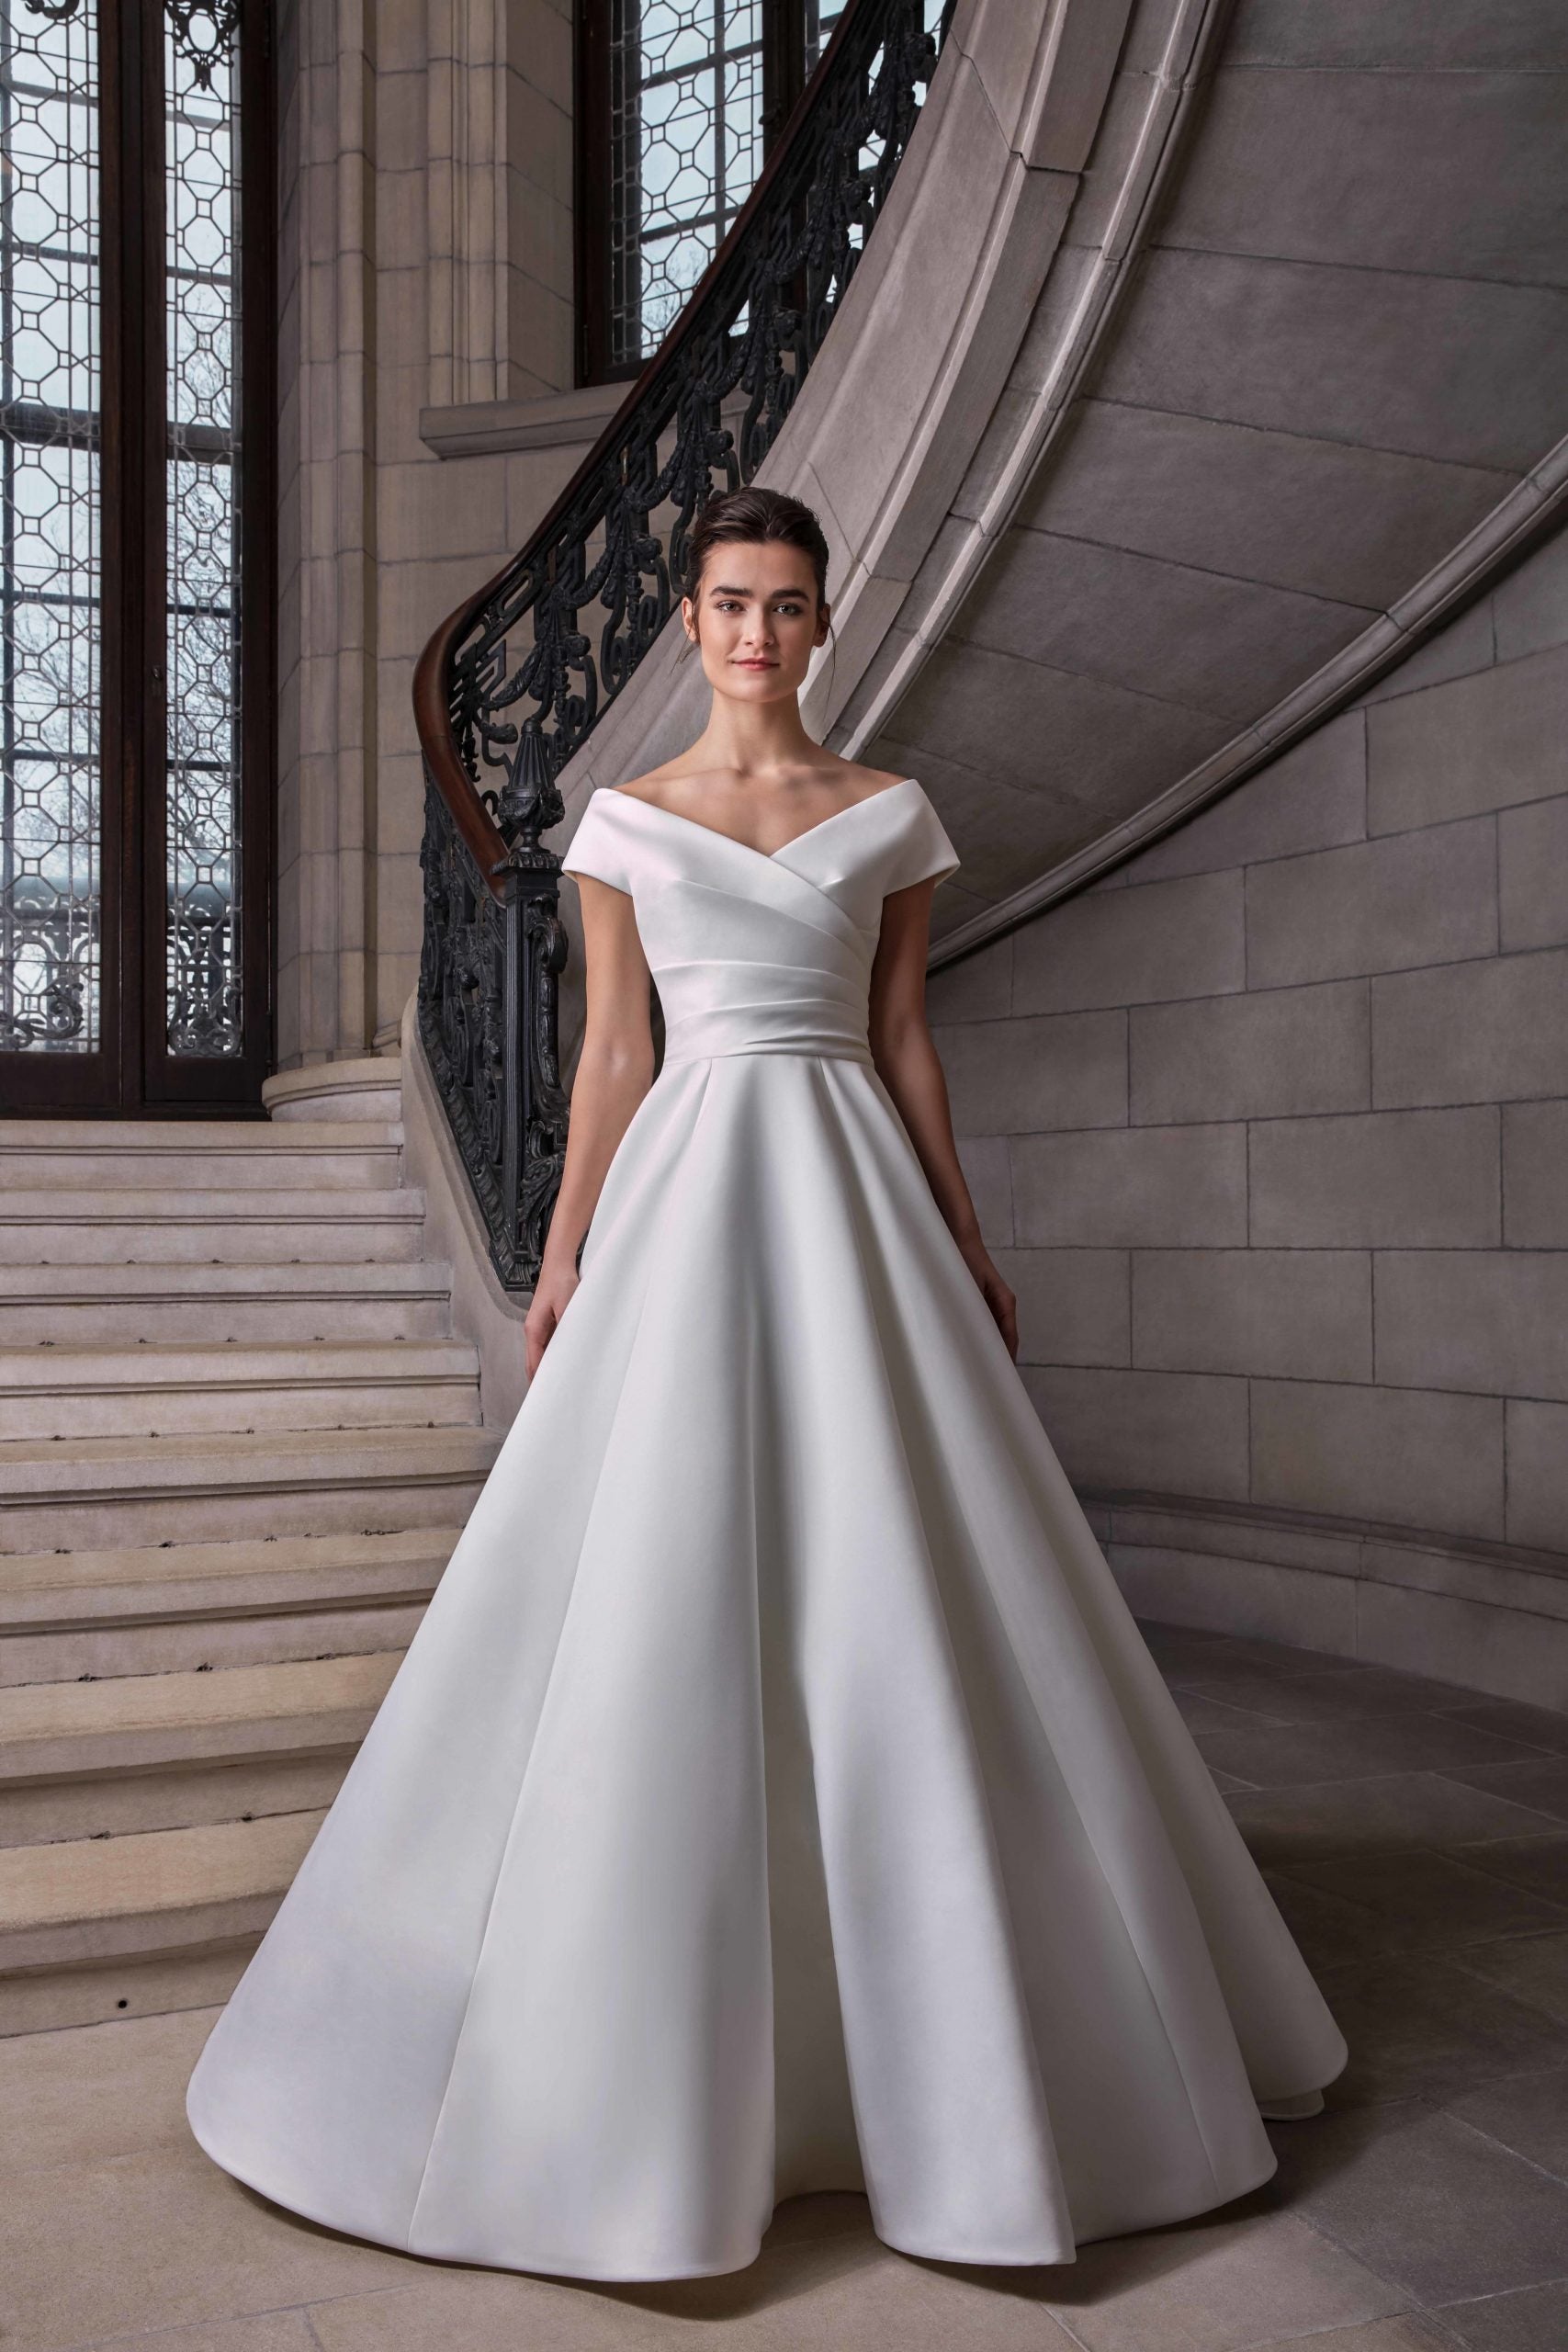 Simple Silk Ball Gown Wedding Dress. wedding dress with buttons down the fr...